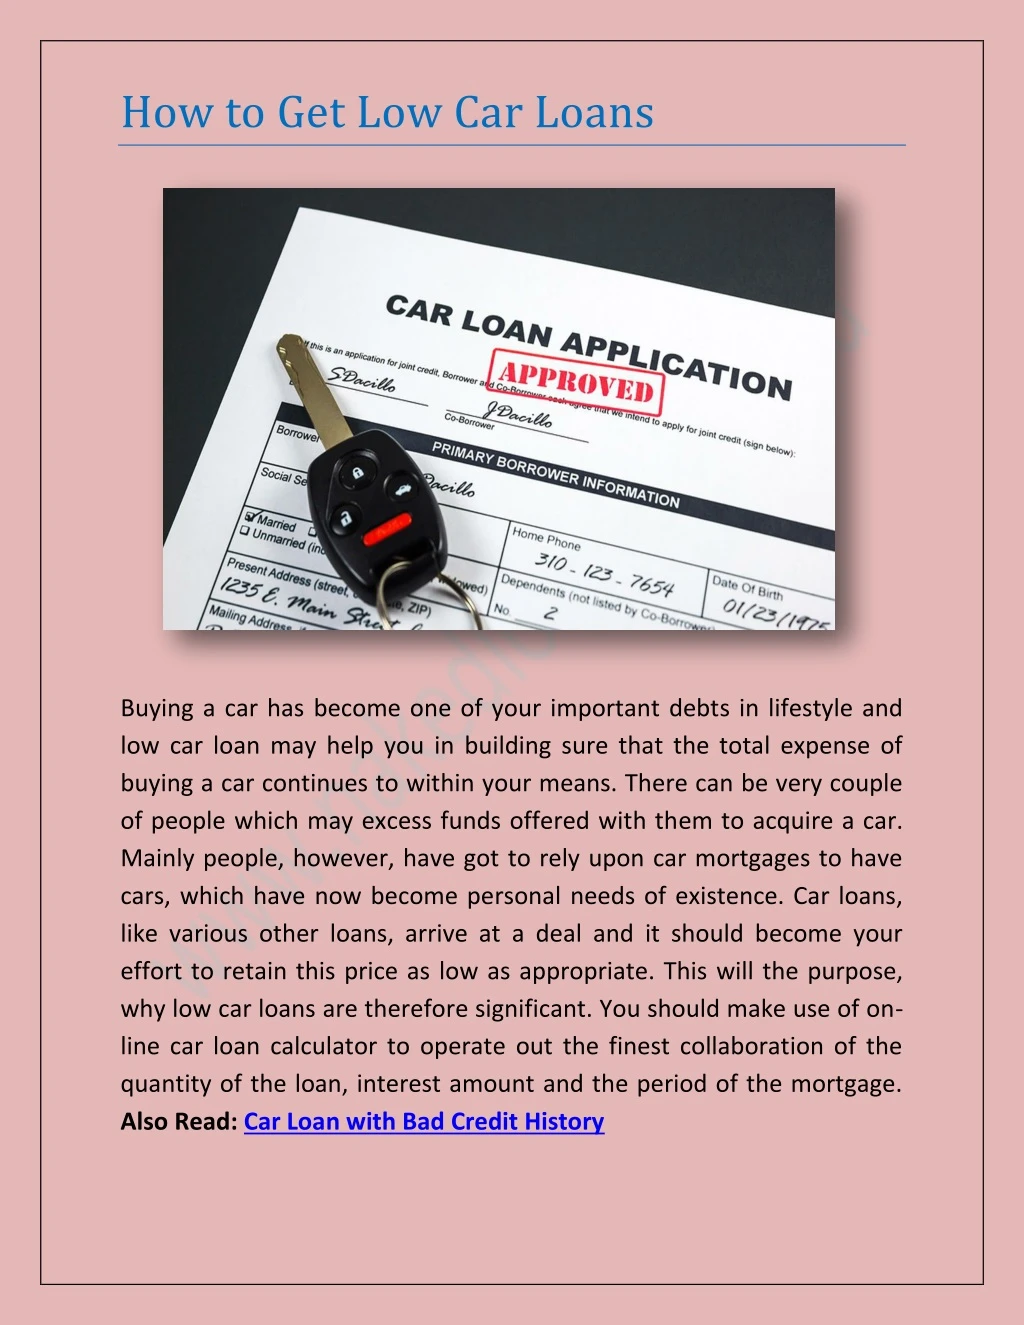 how to get low car loans